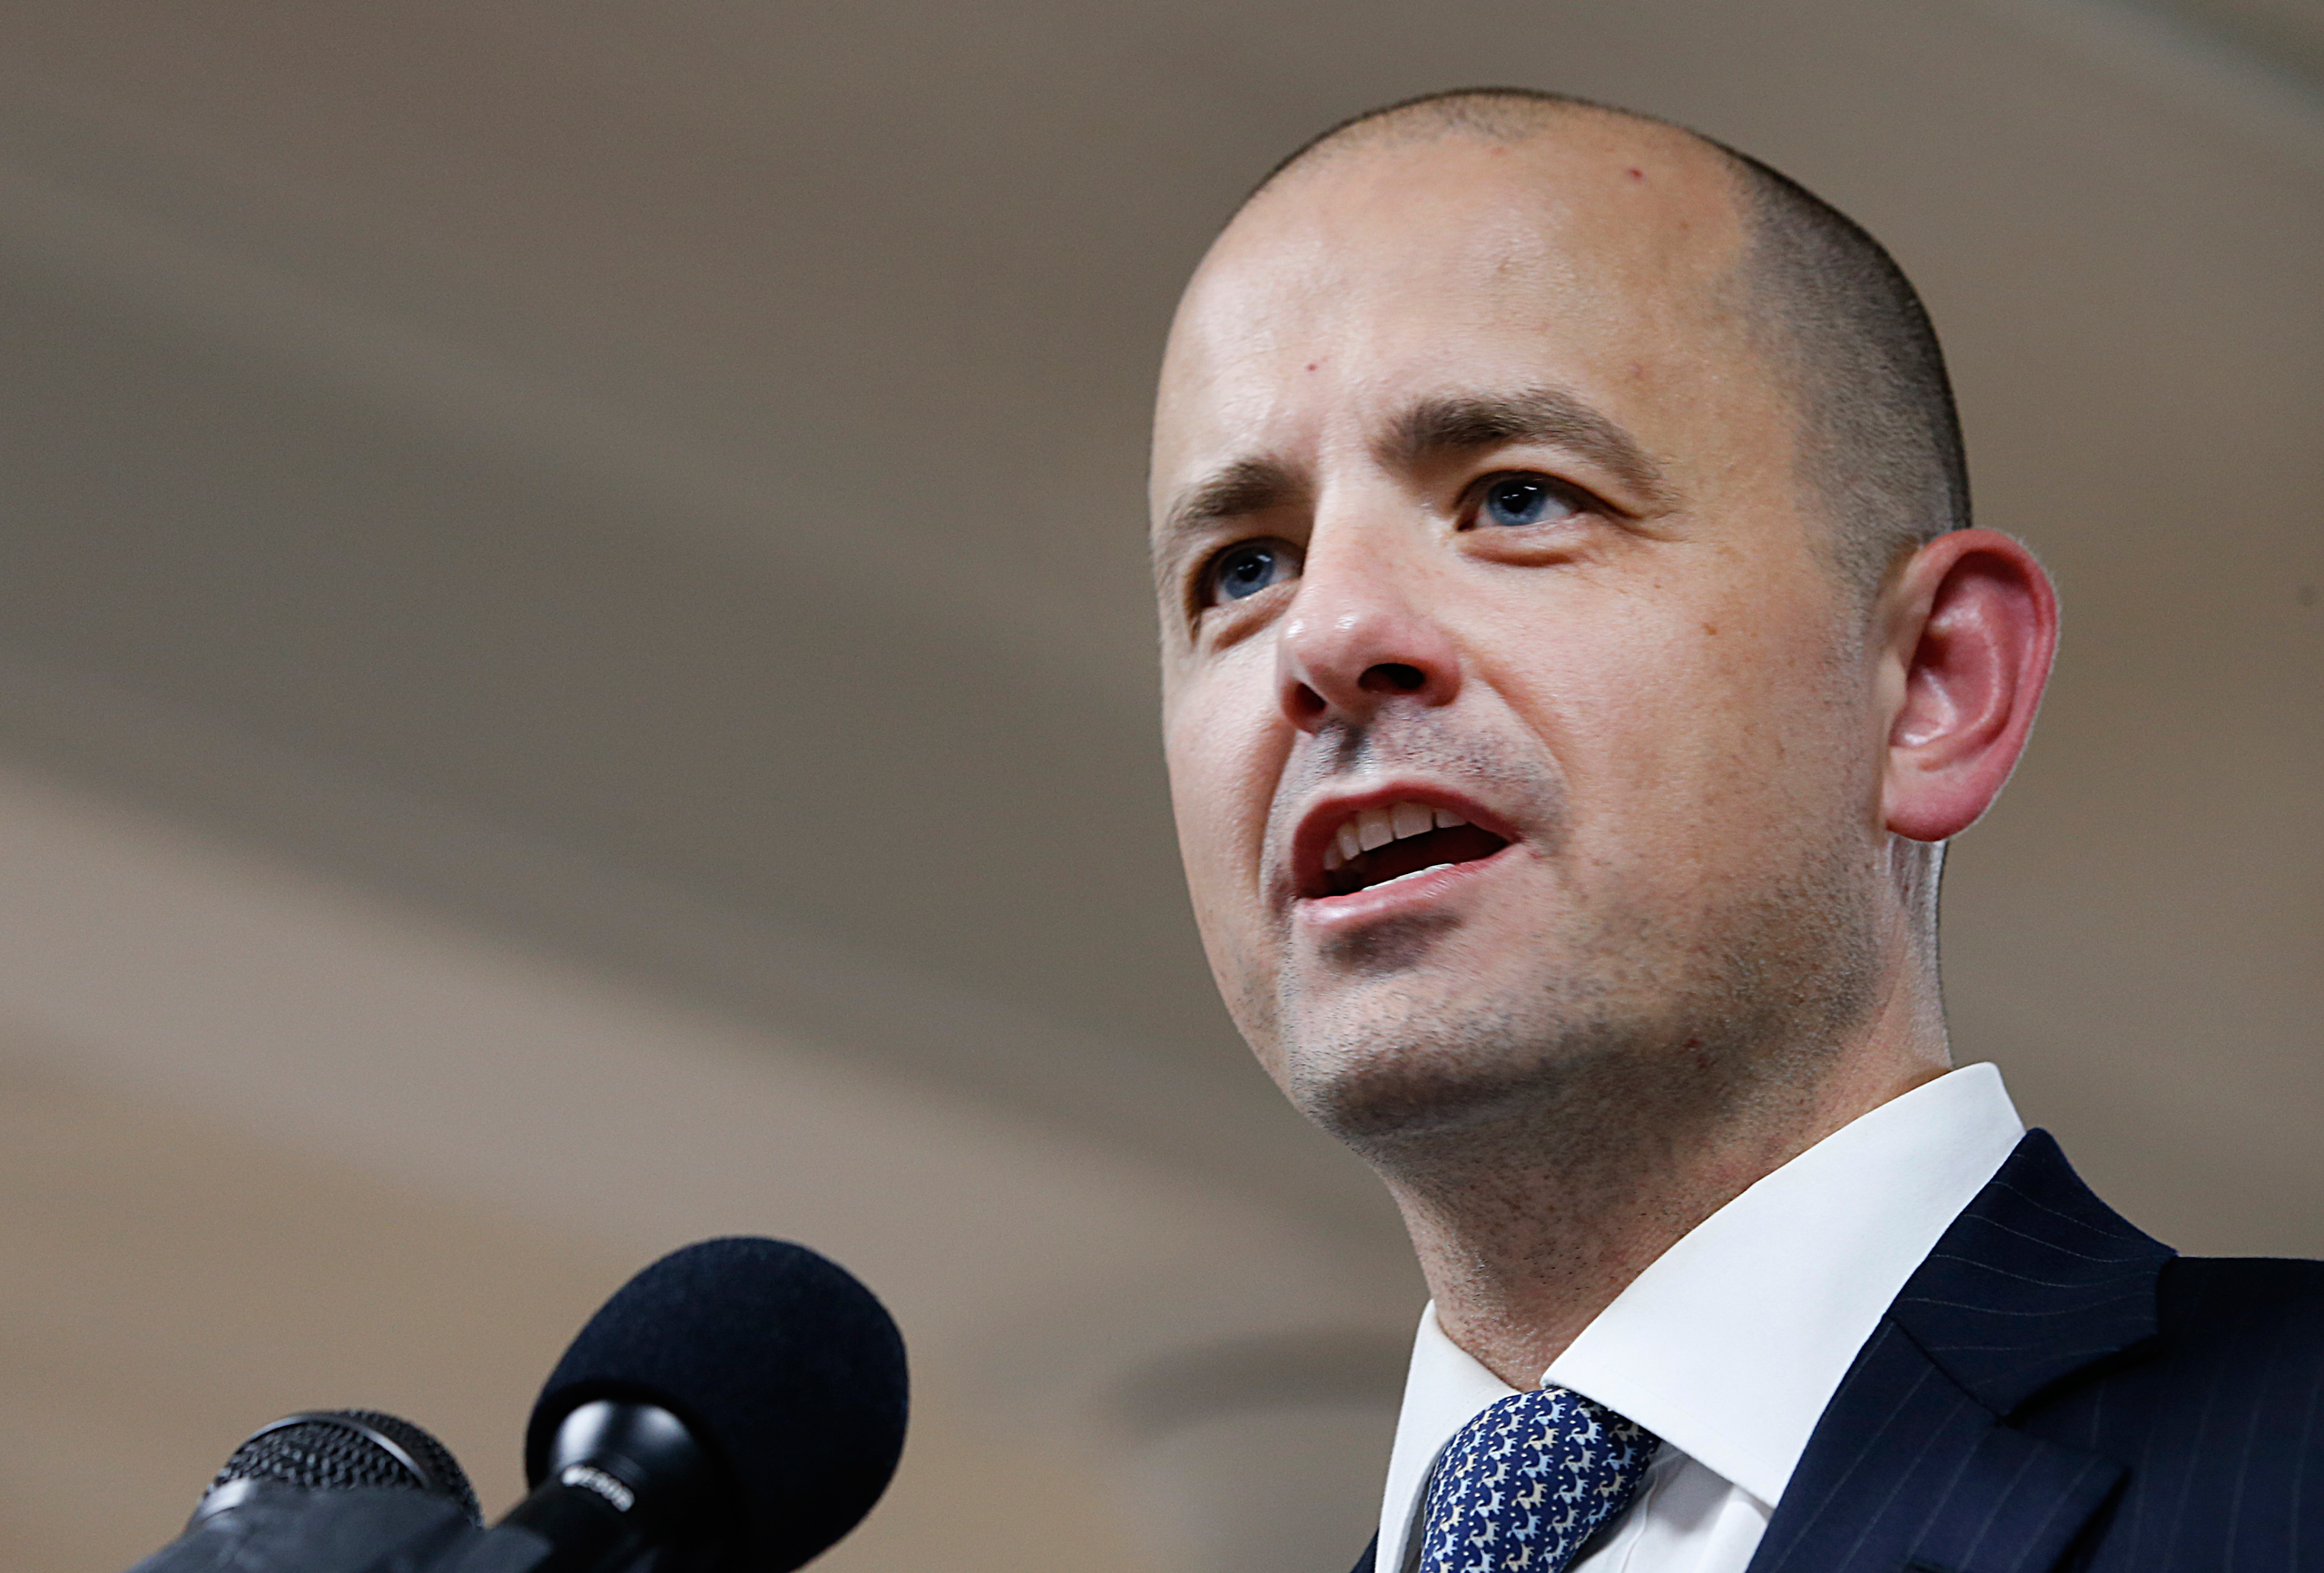 Former CIA Agent Evan McMullin Launches Presidential Campaign In Salt Lake City